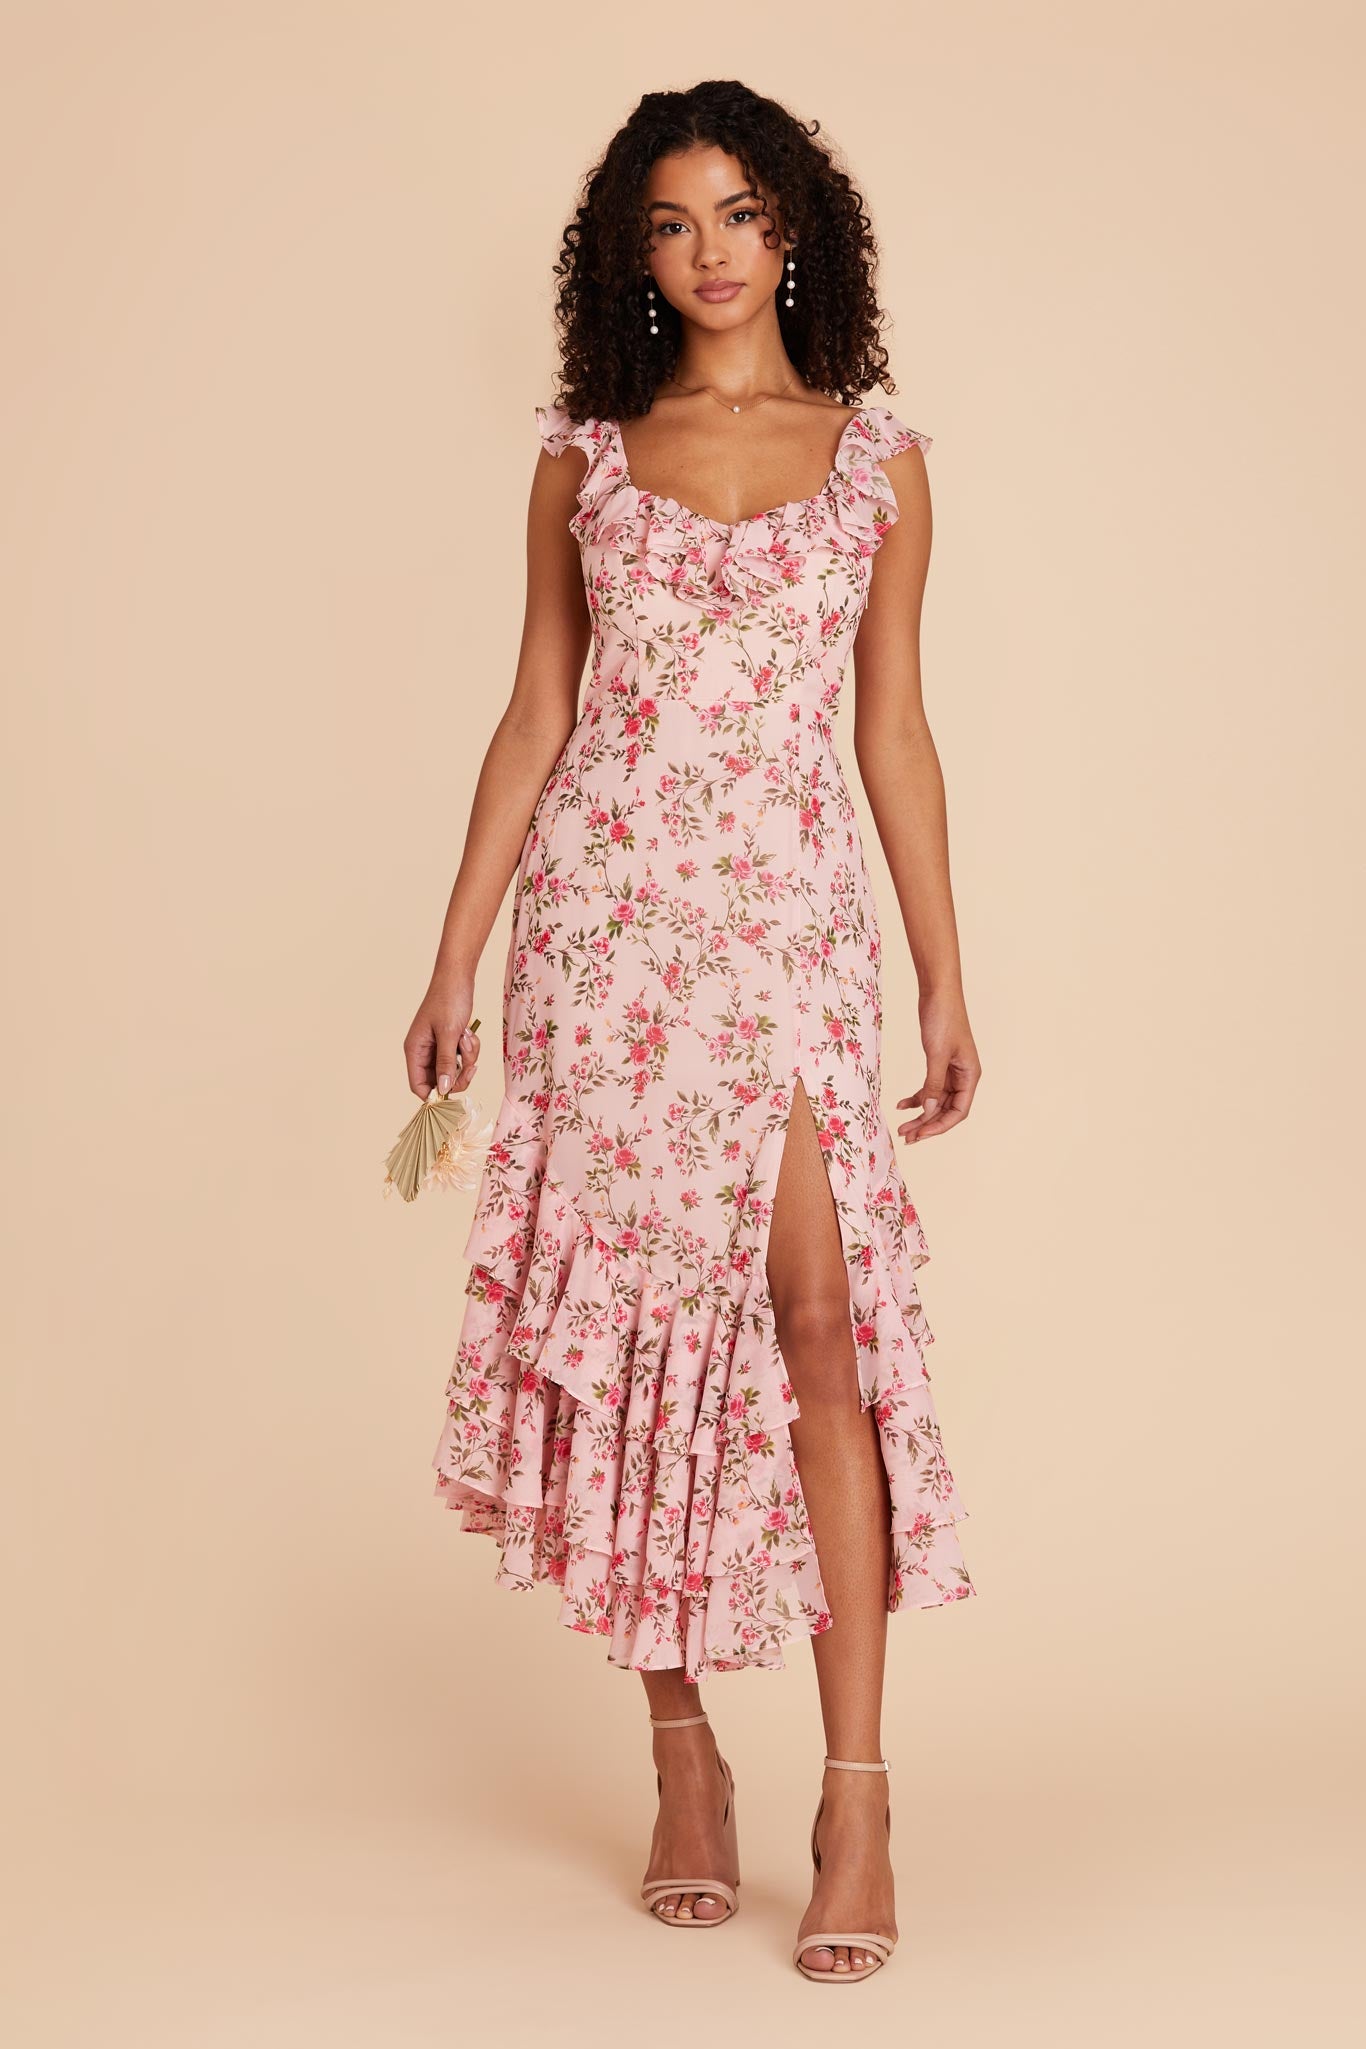 Floral Dresses – All The Wild Roses